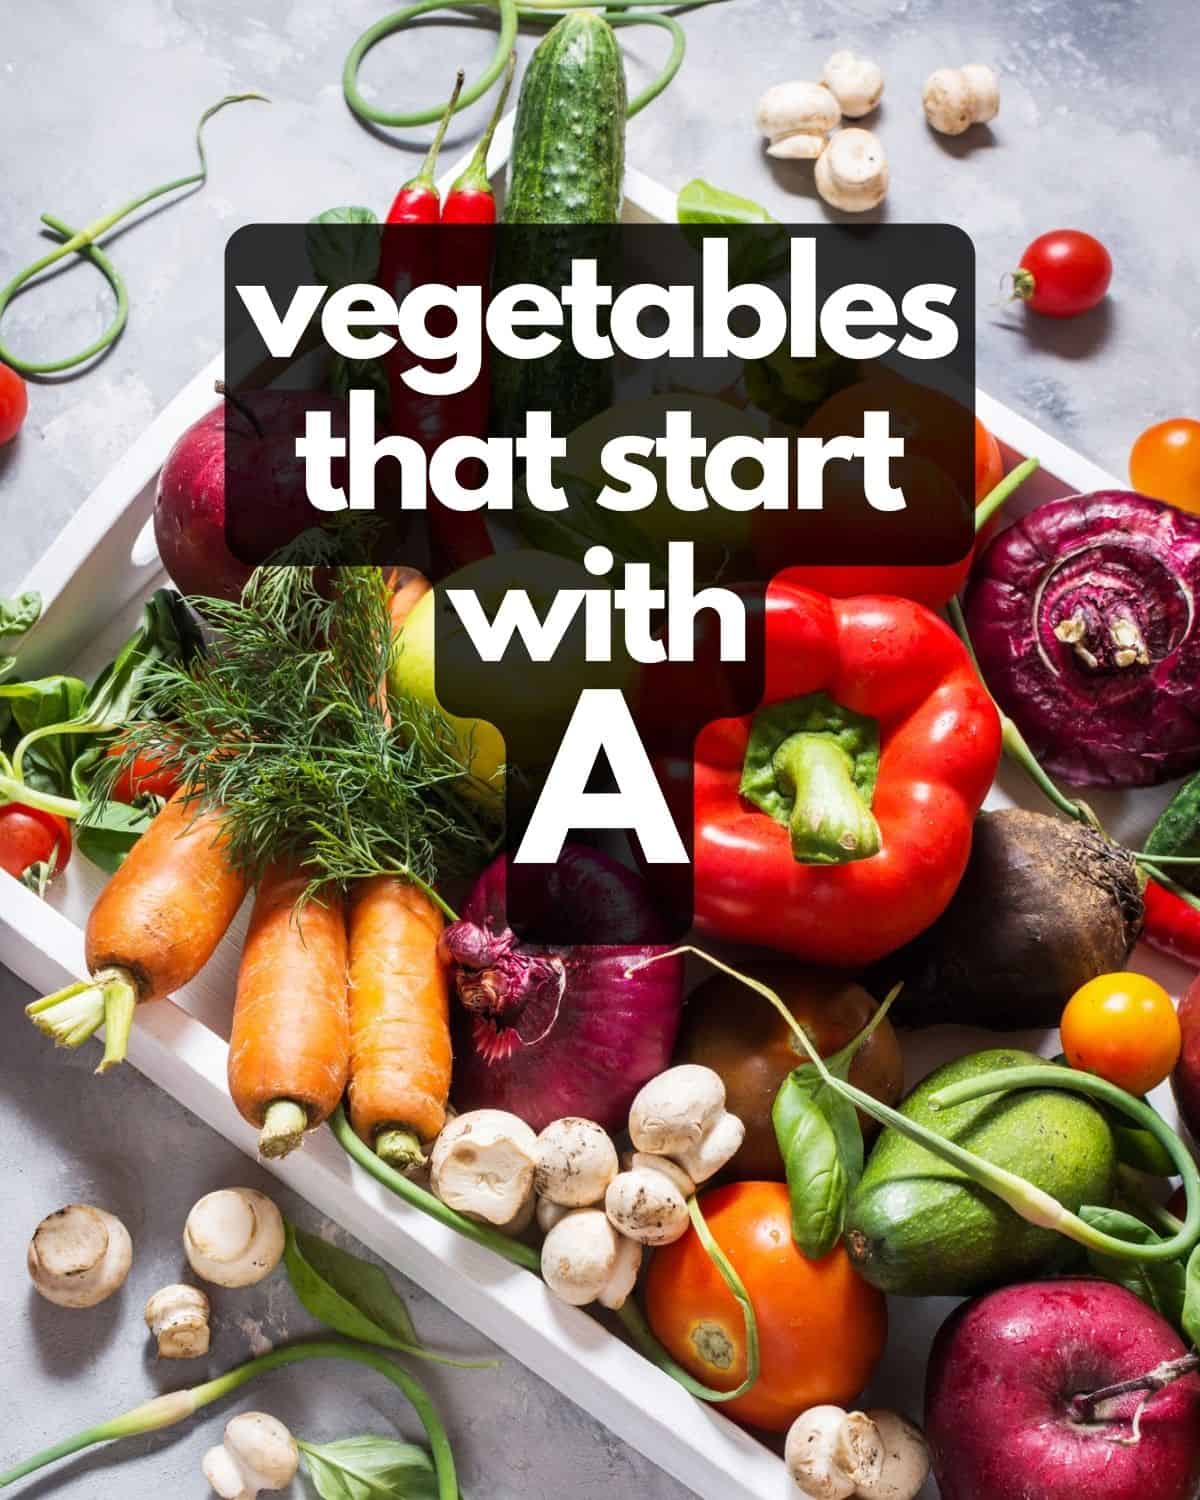 Table of vegetables, plus text: Vegetables that start with A.